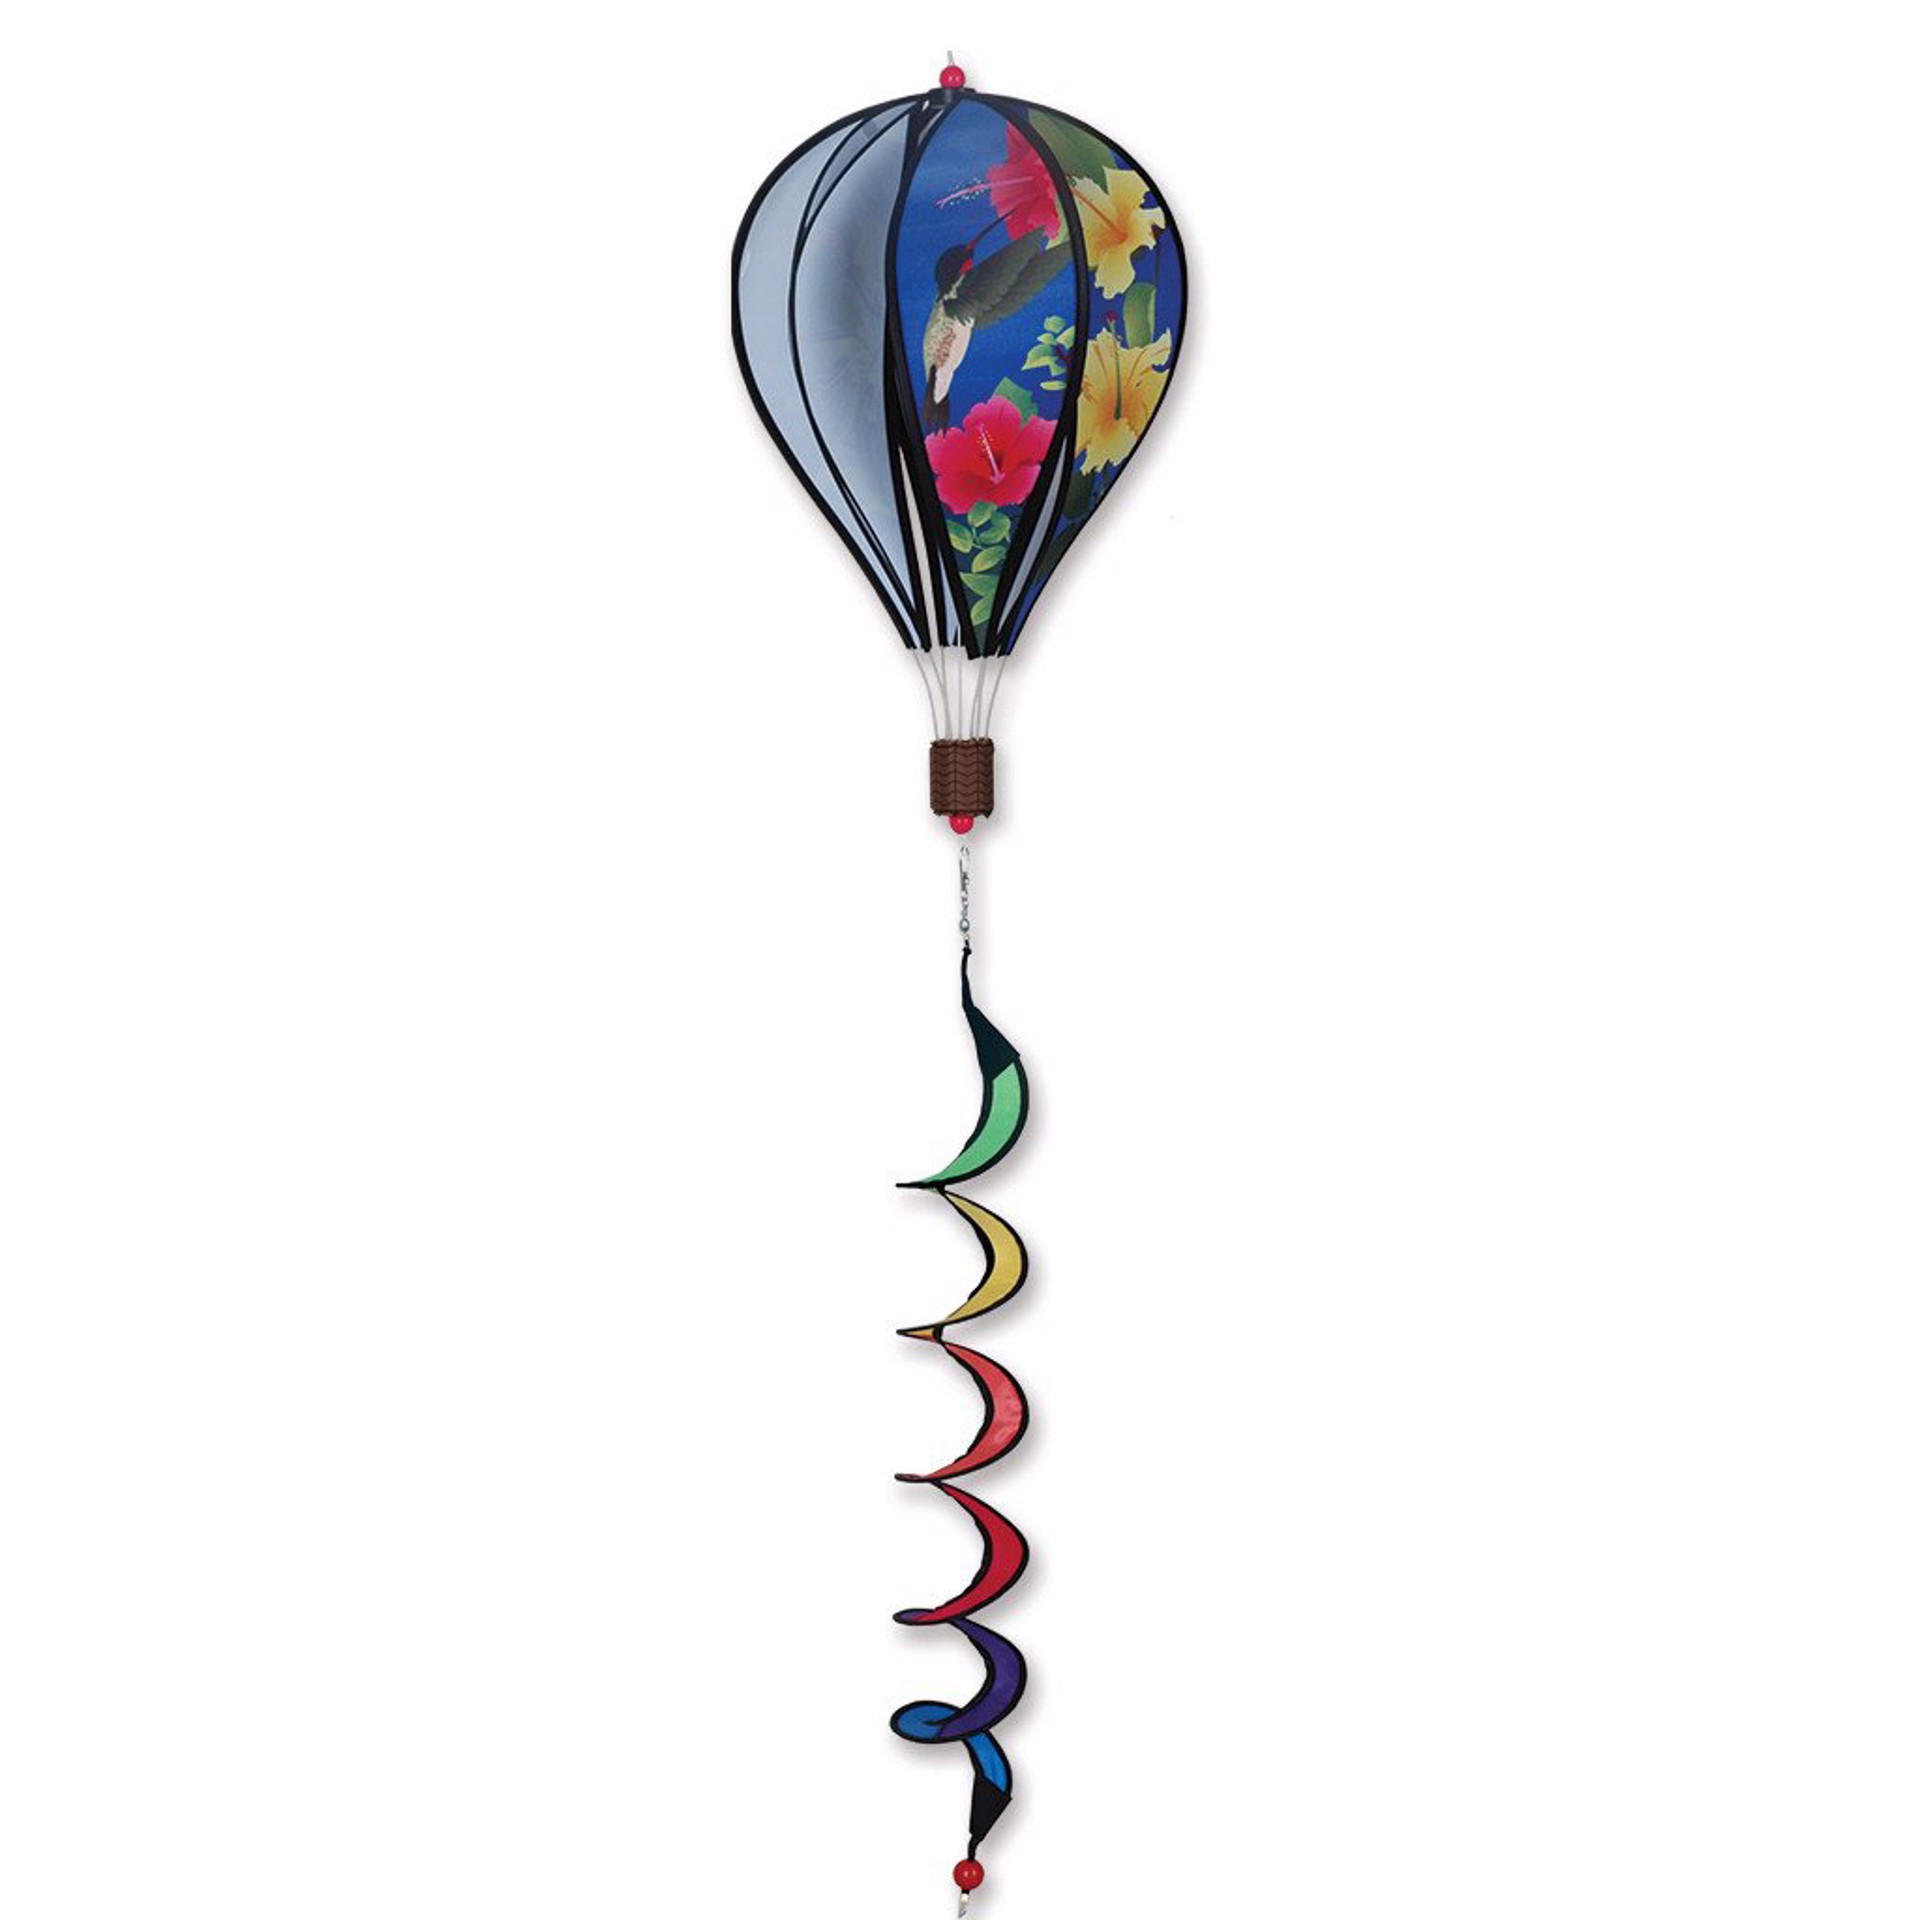 16" Kinetic Hot Air Balloon - Assorted Designs by David Ti